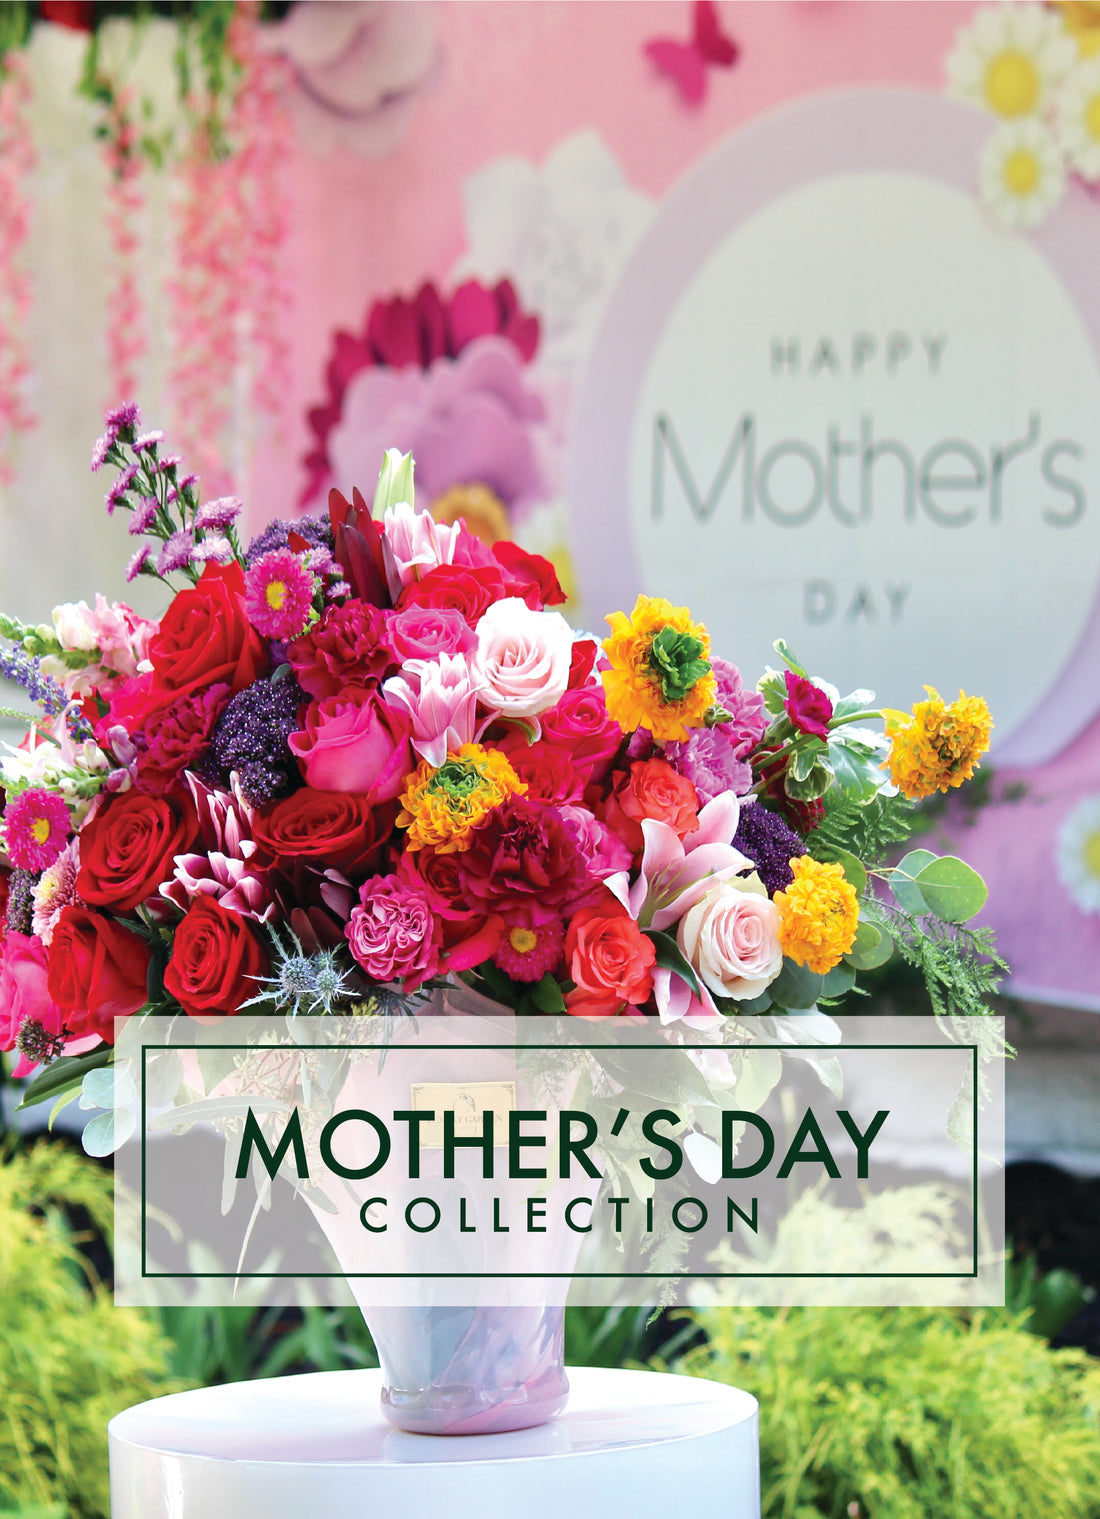  MOTHER'S DAY COLLECTION